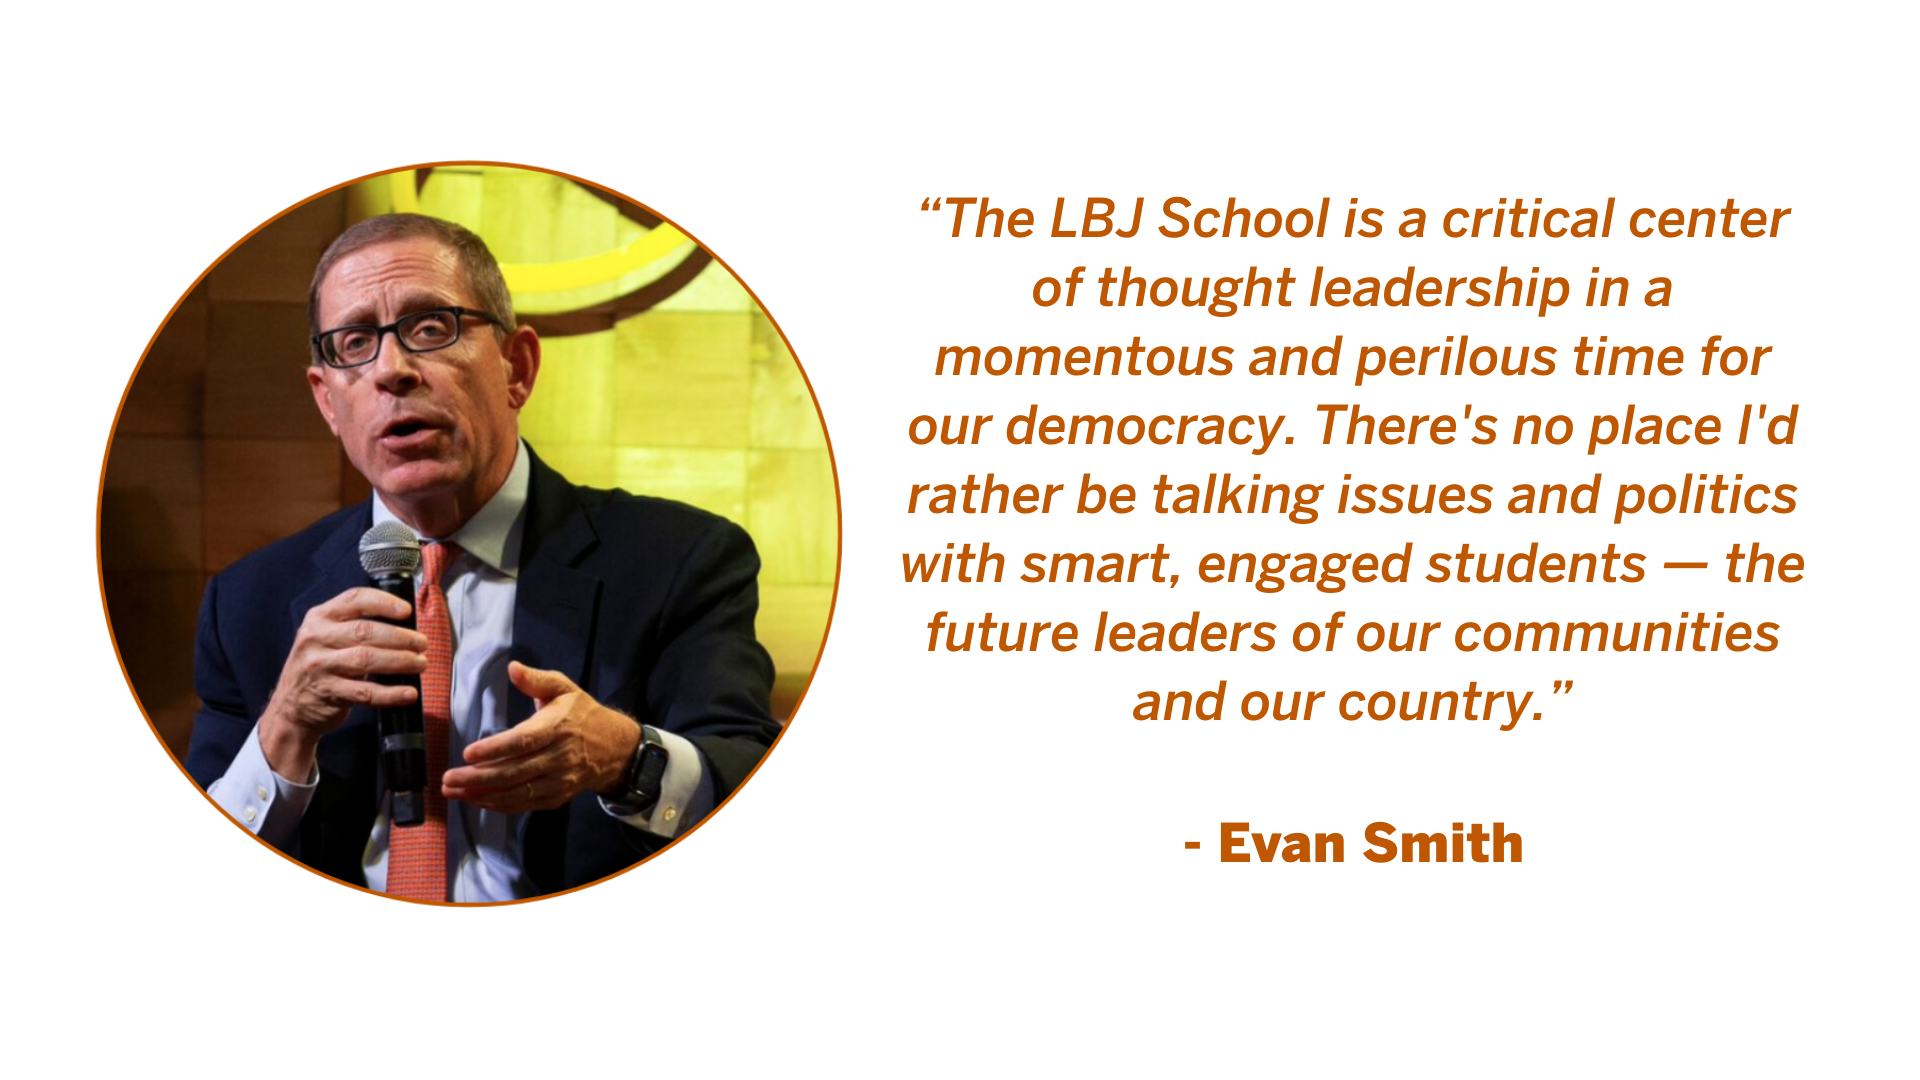 Evan Smith Quote: “The LBJ School is a critical center of thought leadership in a momentous and perilous time for our democracy. There's no place I'd rather be talking issues and politics with smart, engaged students — the future leaders of our communities and our country.”